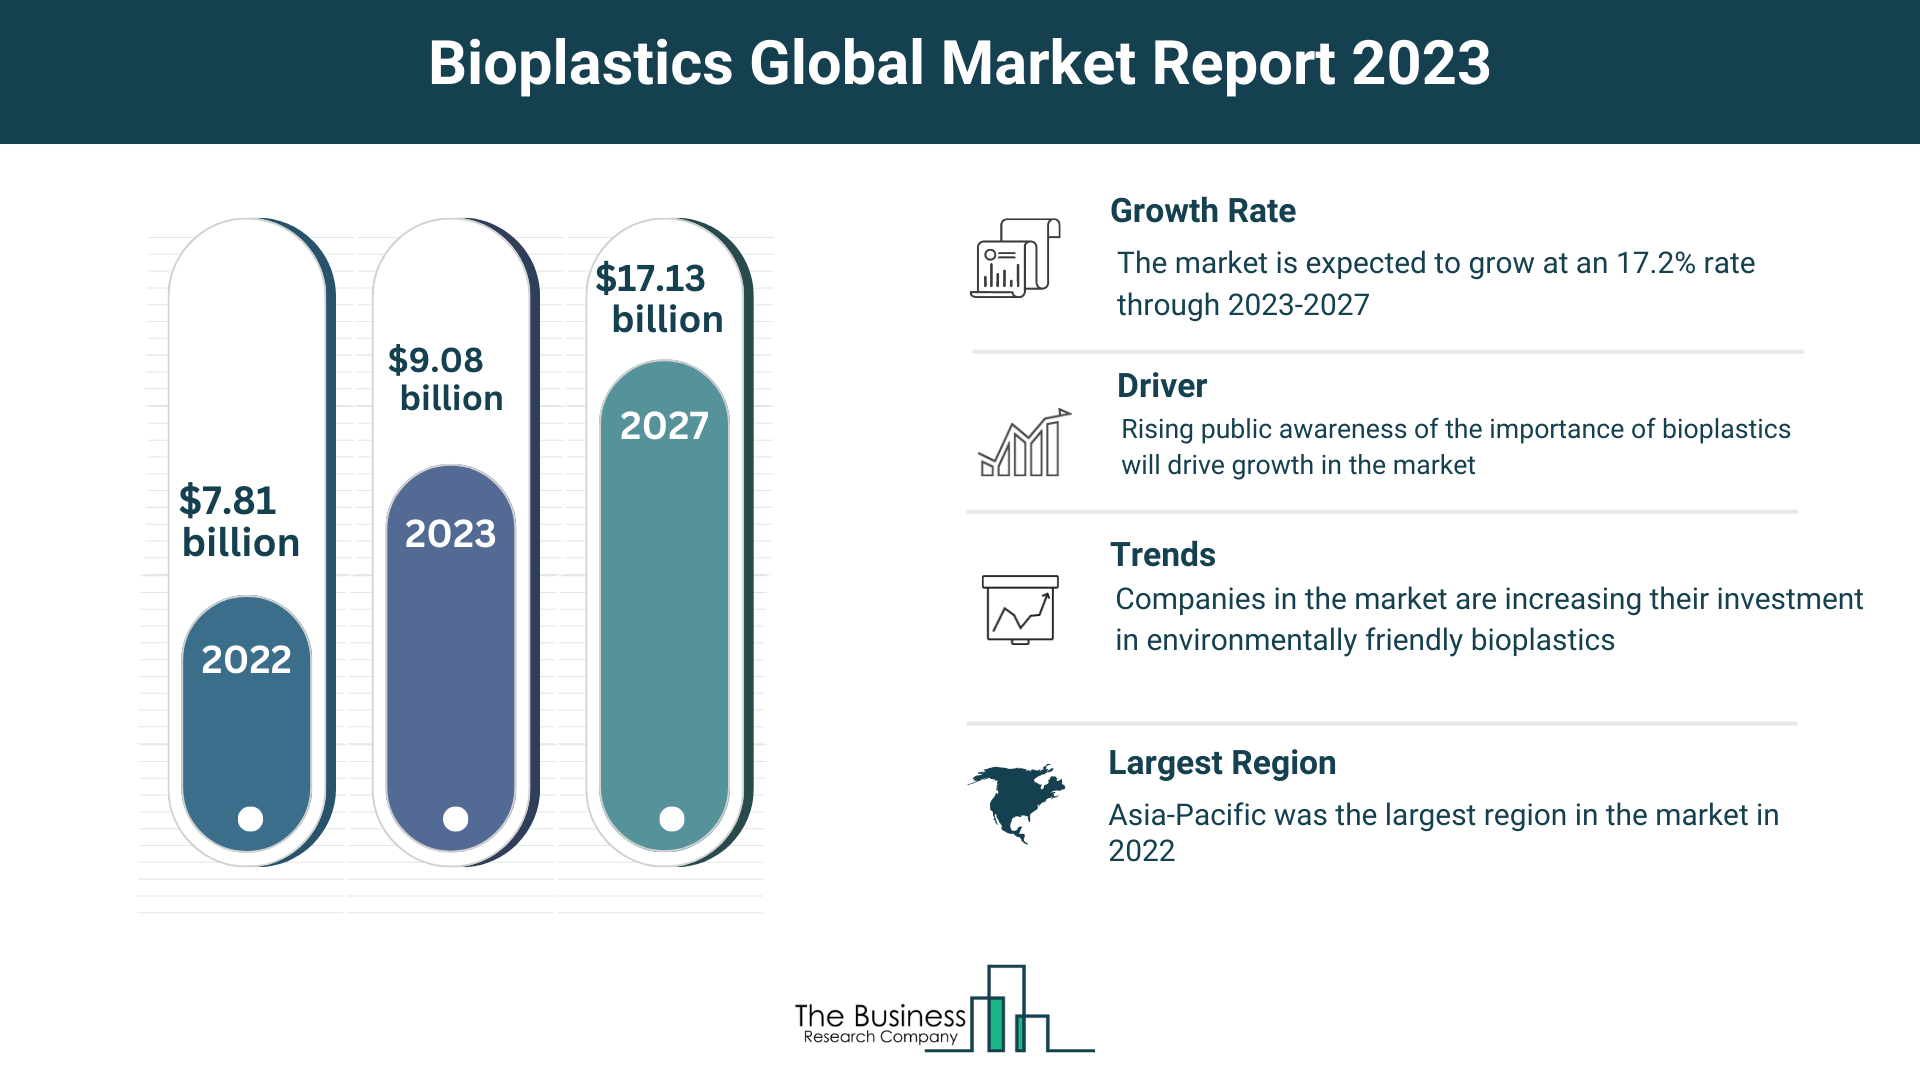 Global Bioplastics Market Overview 2023: Size, Drivers, And Trends